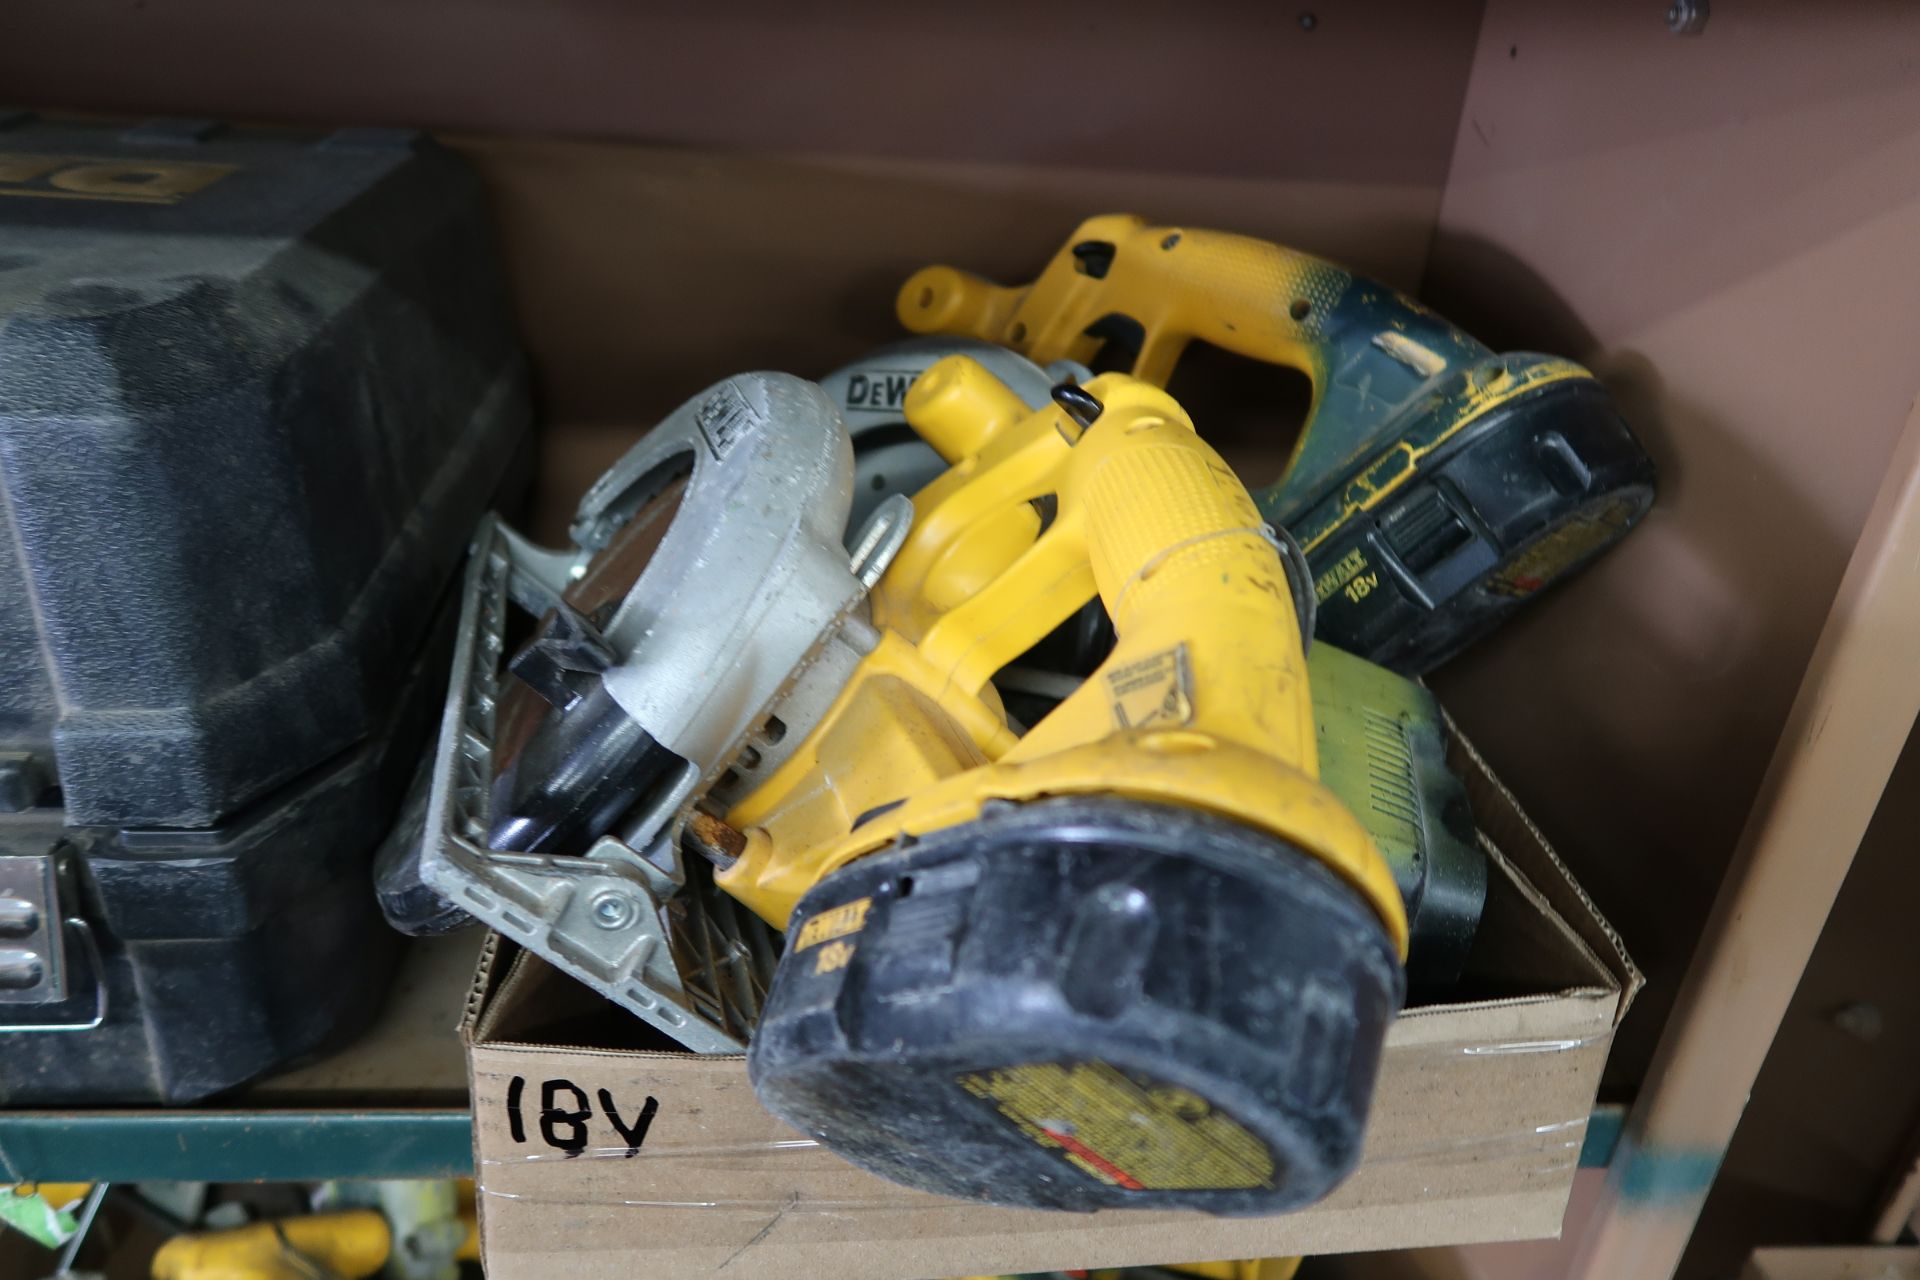 DeWalt 18Volt Cordless Circular Saws (4) (NO CHARGERS OR BATTERIES) (SOLD AS-IS - NO WARRANTY) - Image 4 of 5